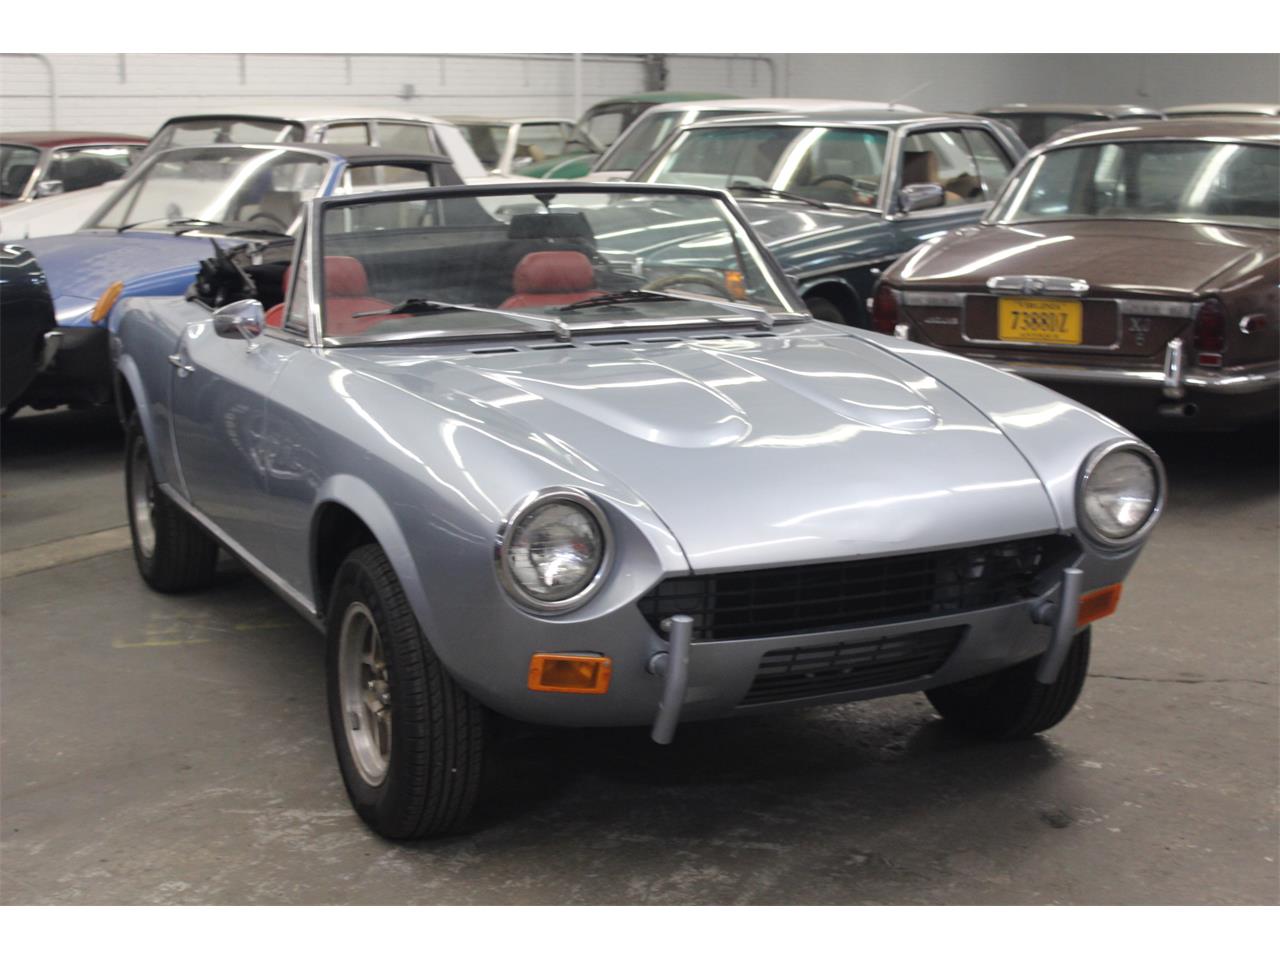 For Sale: 1978 Fiat 124 in Elyria, Ohio for sale in Elyria, OH